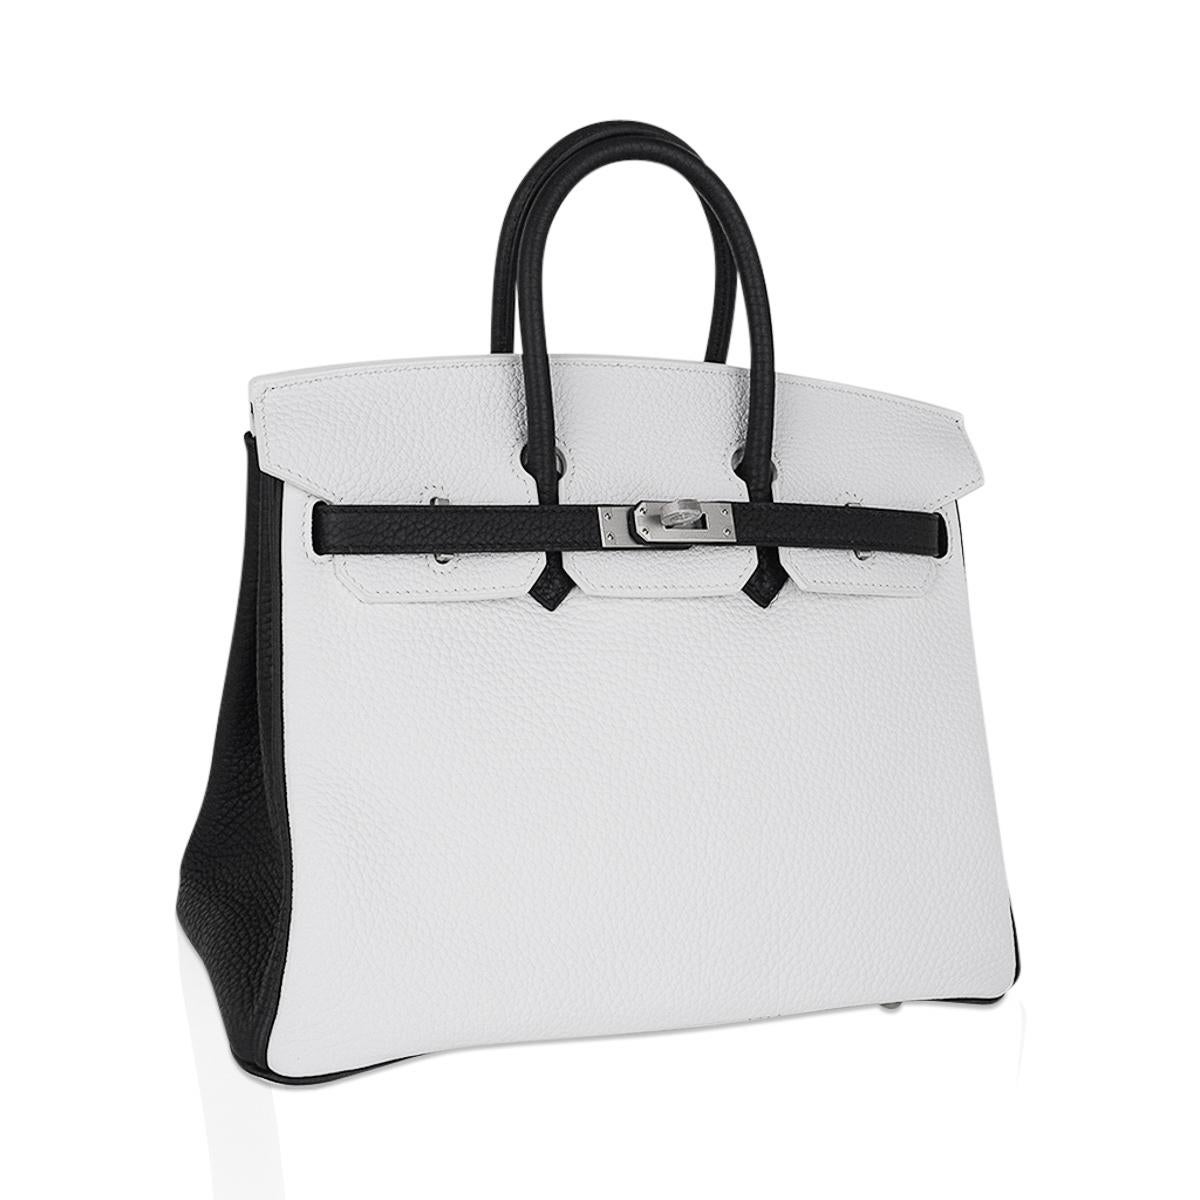 Mightychic offers an Hermes Birkin HSS 25 Horseshoe Stamp bag featured in White and Black.
Beautiful crisp bag in clemence leather.
This special order clemence leather Hermes Birkin is black along sides, straps and handles.
Pretty as a